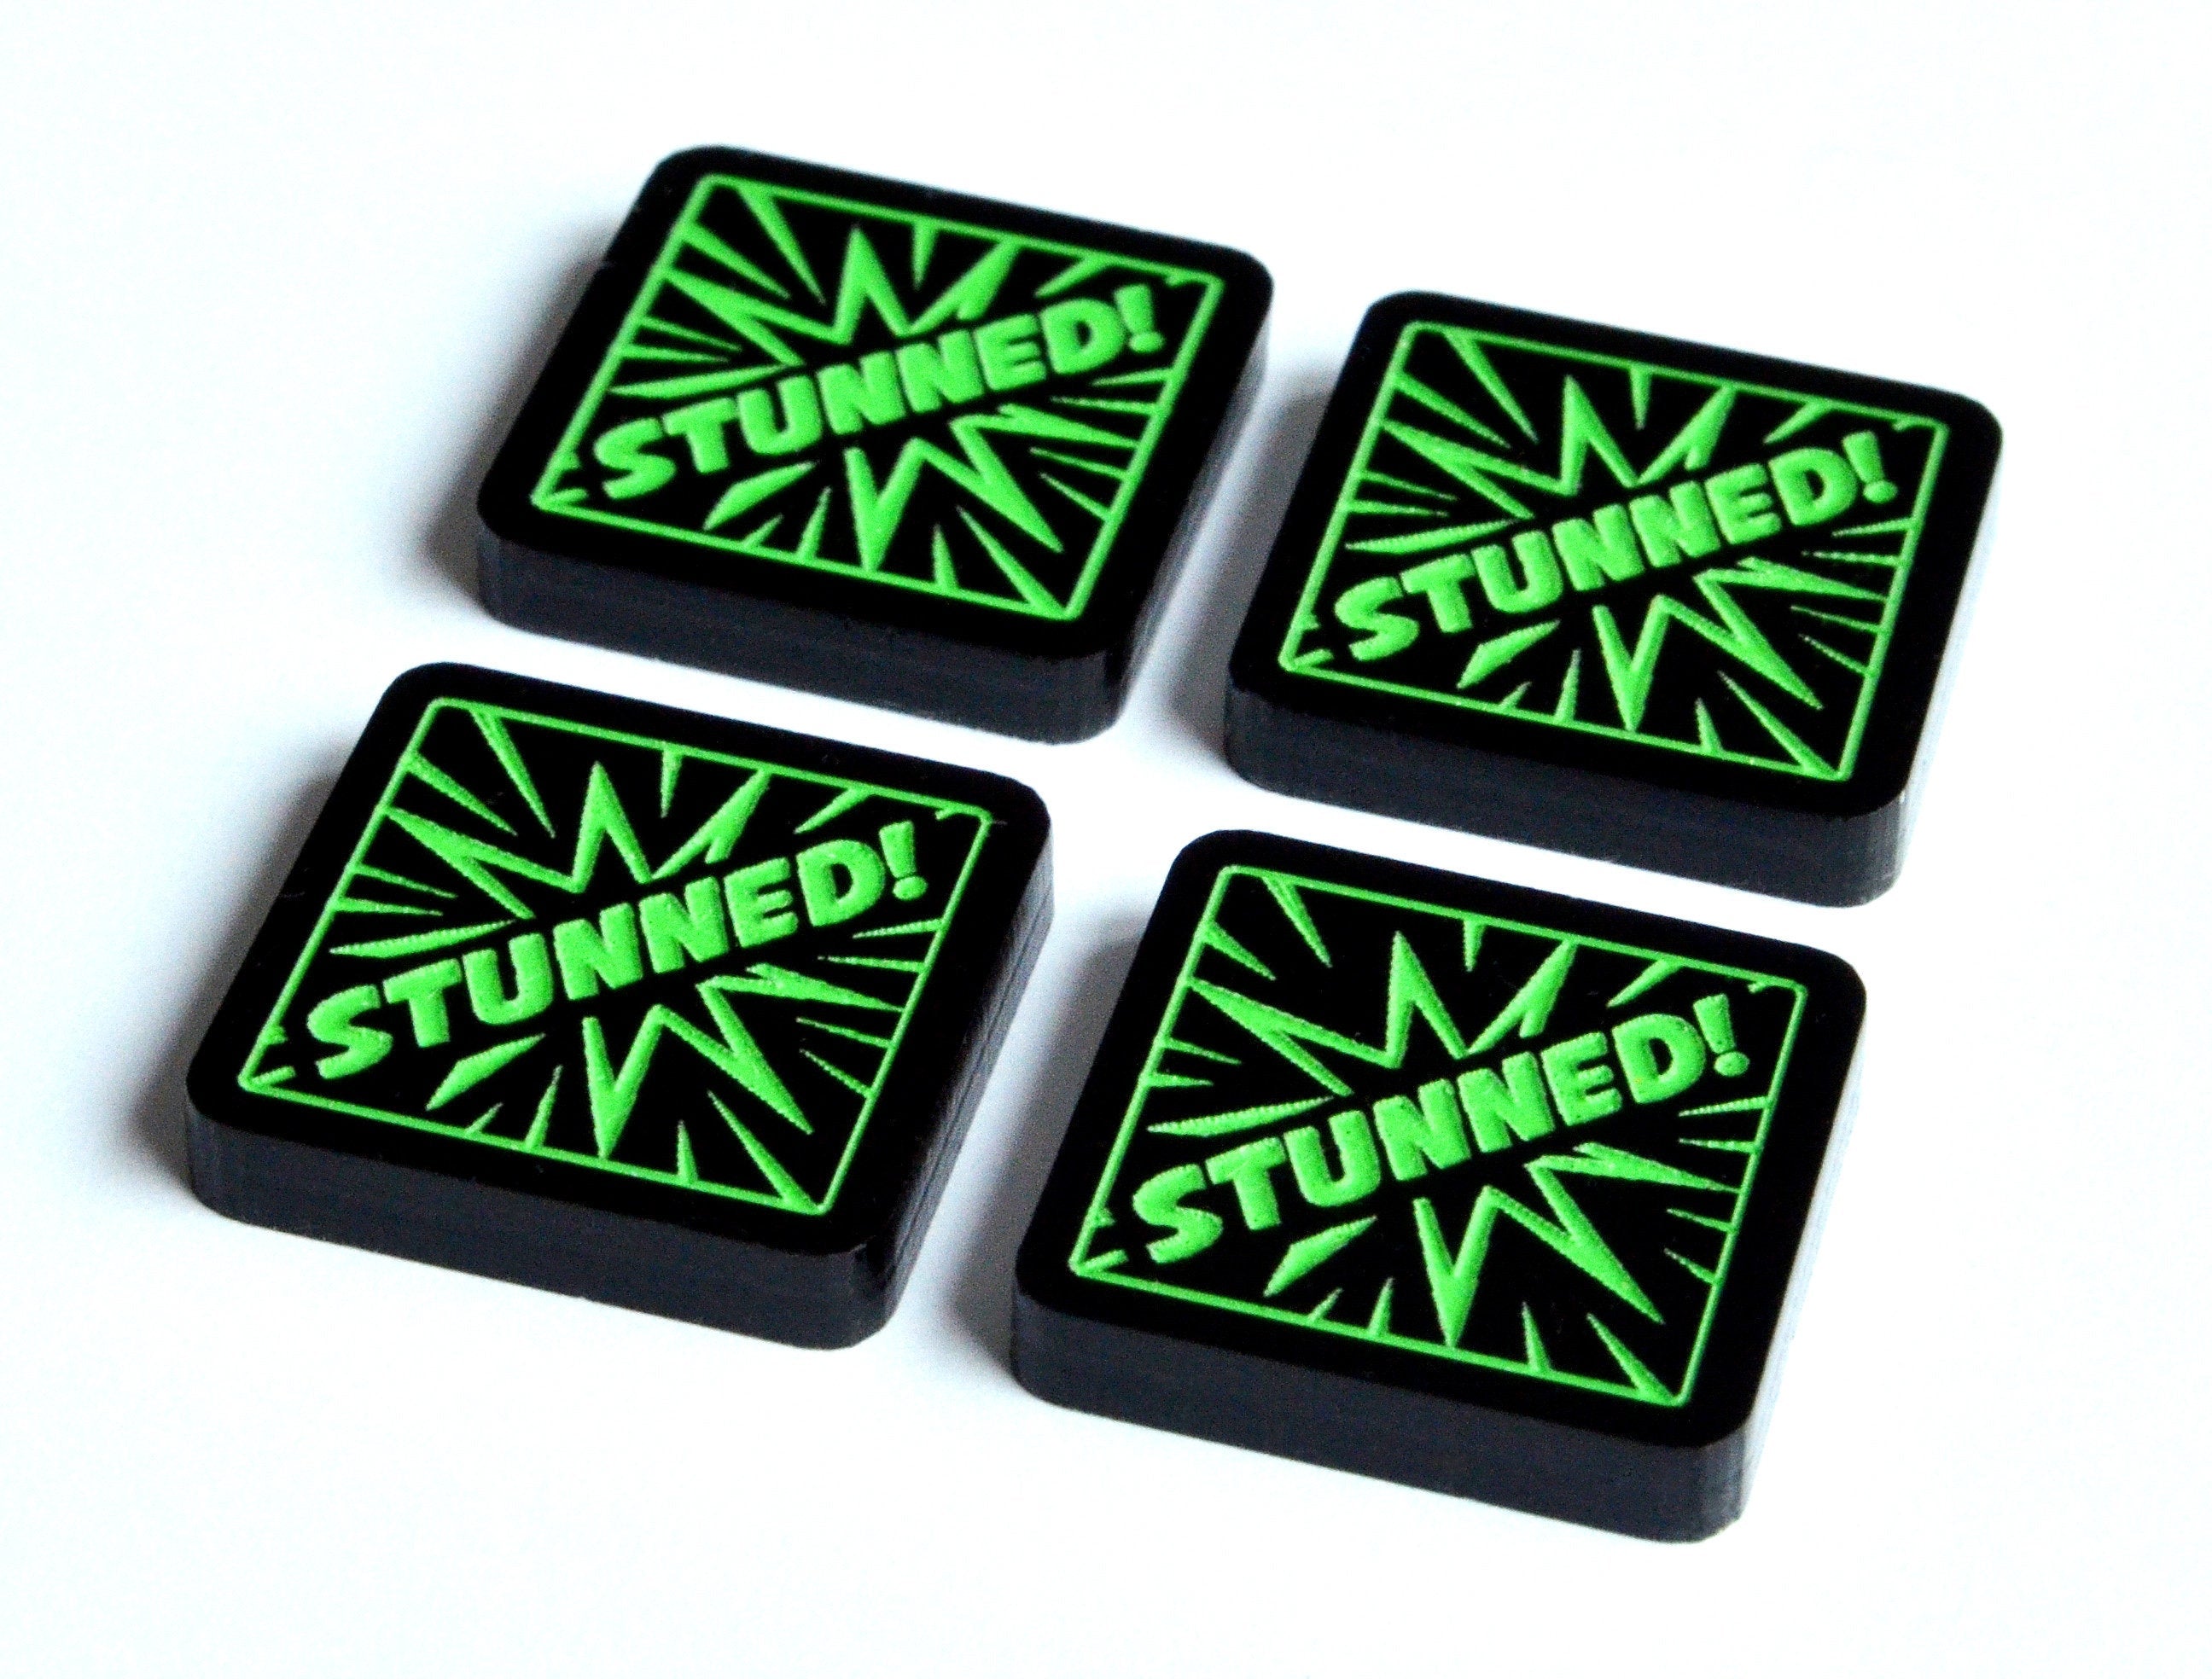 4 x Stunned Status Tokens (double sided) for Marvel Champions LCG